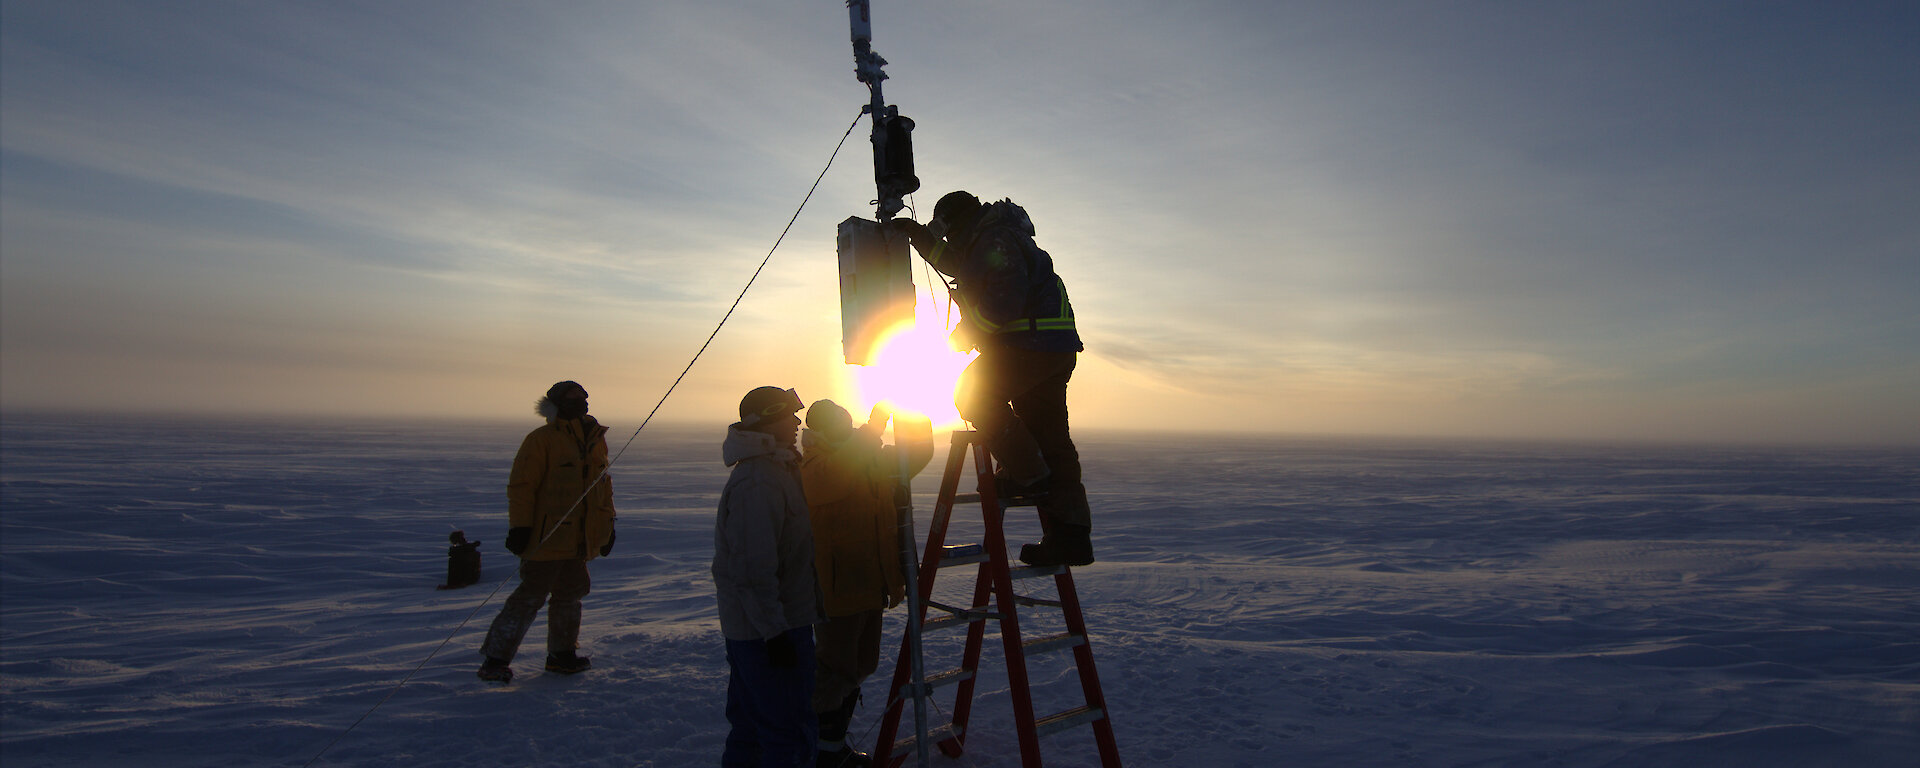 Four people installing equipment on the ice